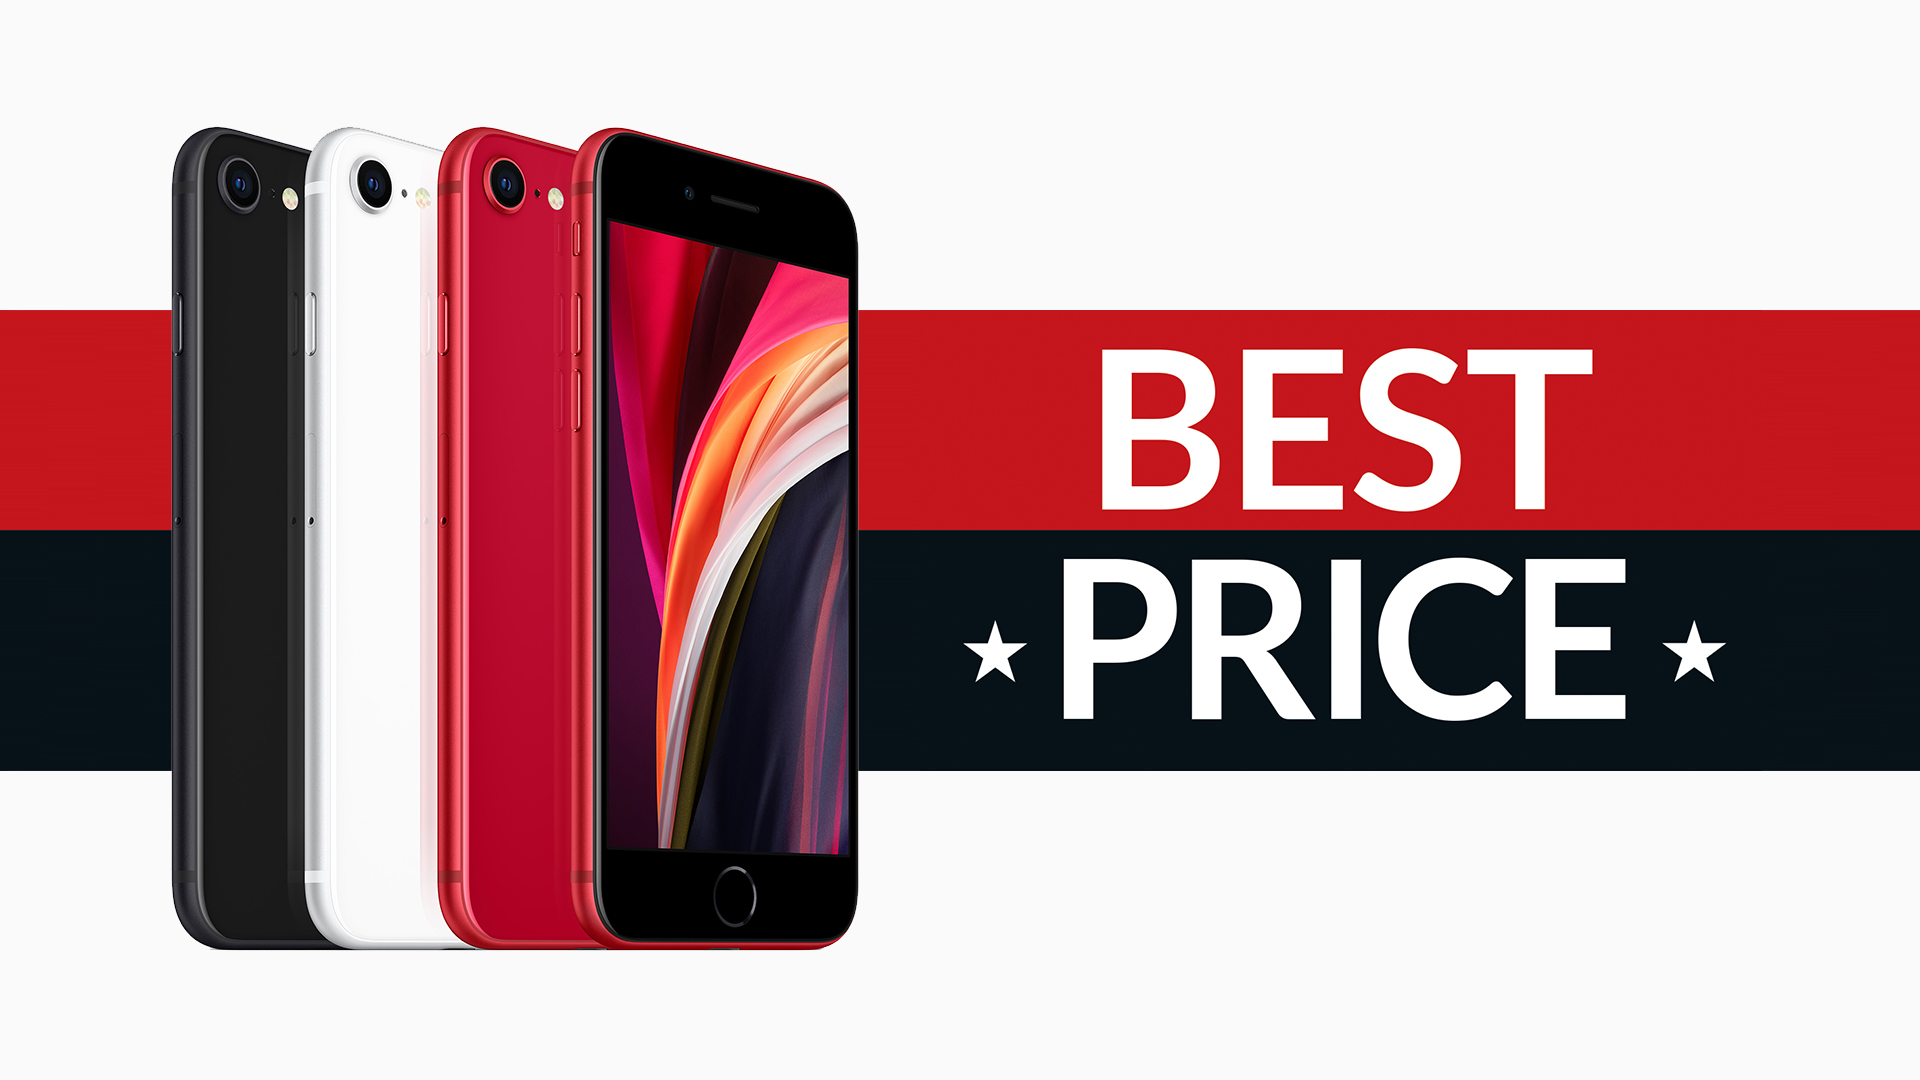 Best Iphone Se Deals For Black Friday 2020 Contracts Plans And Sim Free Prices T3